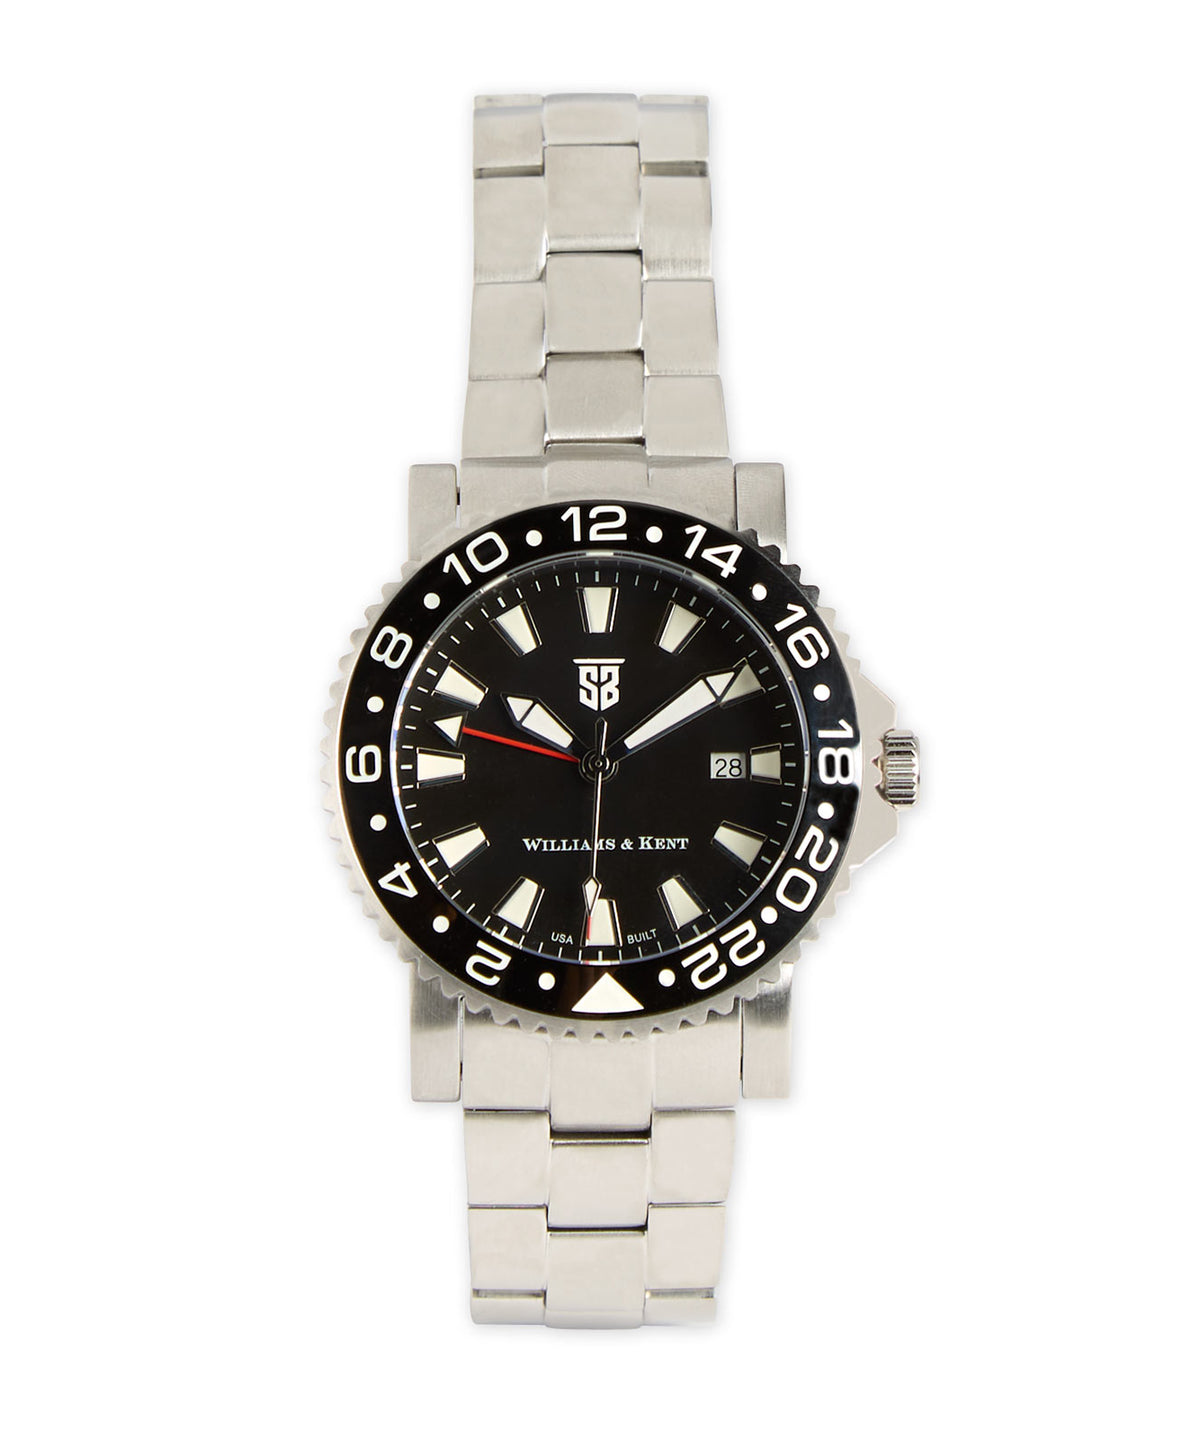 Stainless Steel GMT Travel Watch